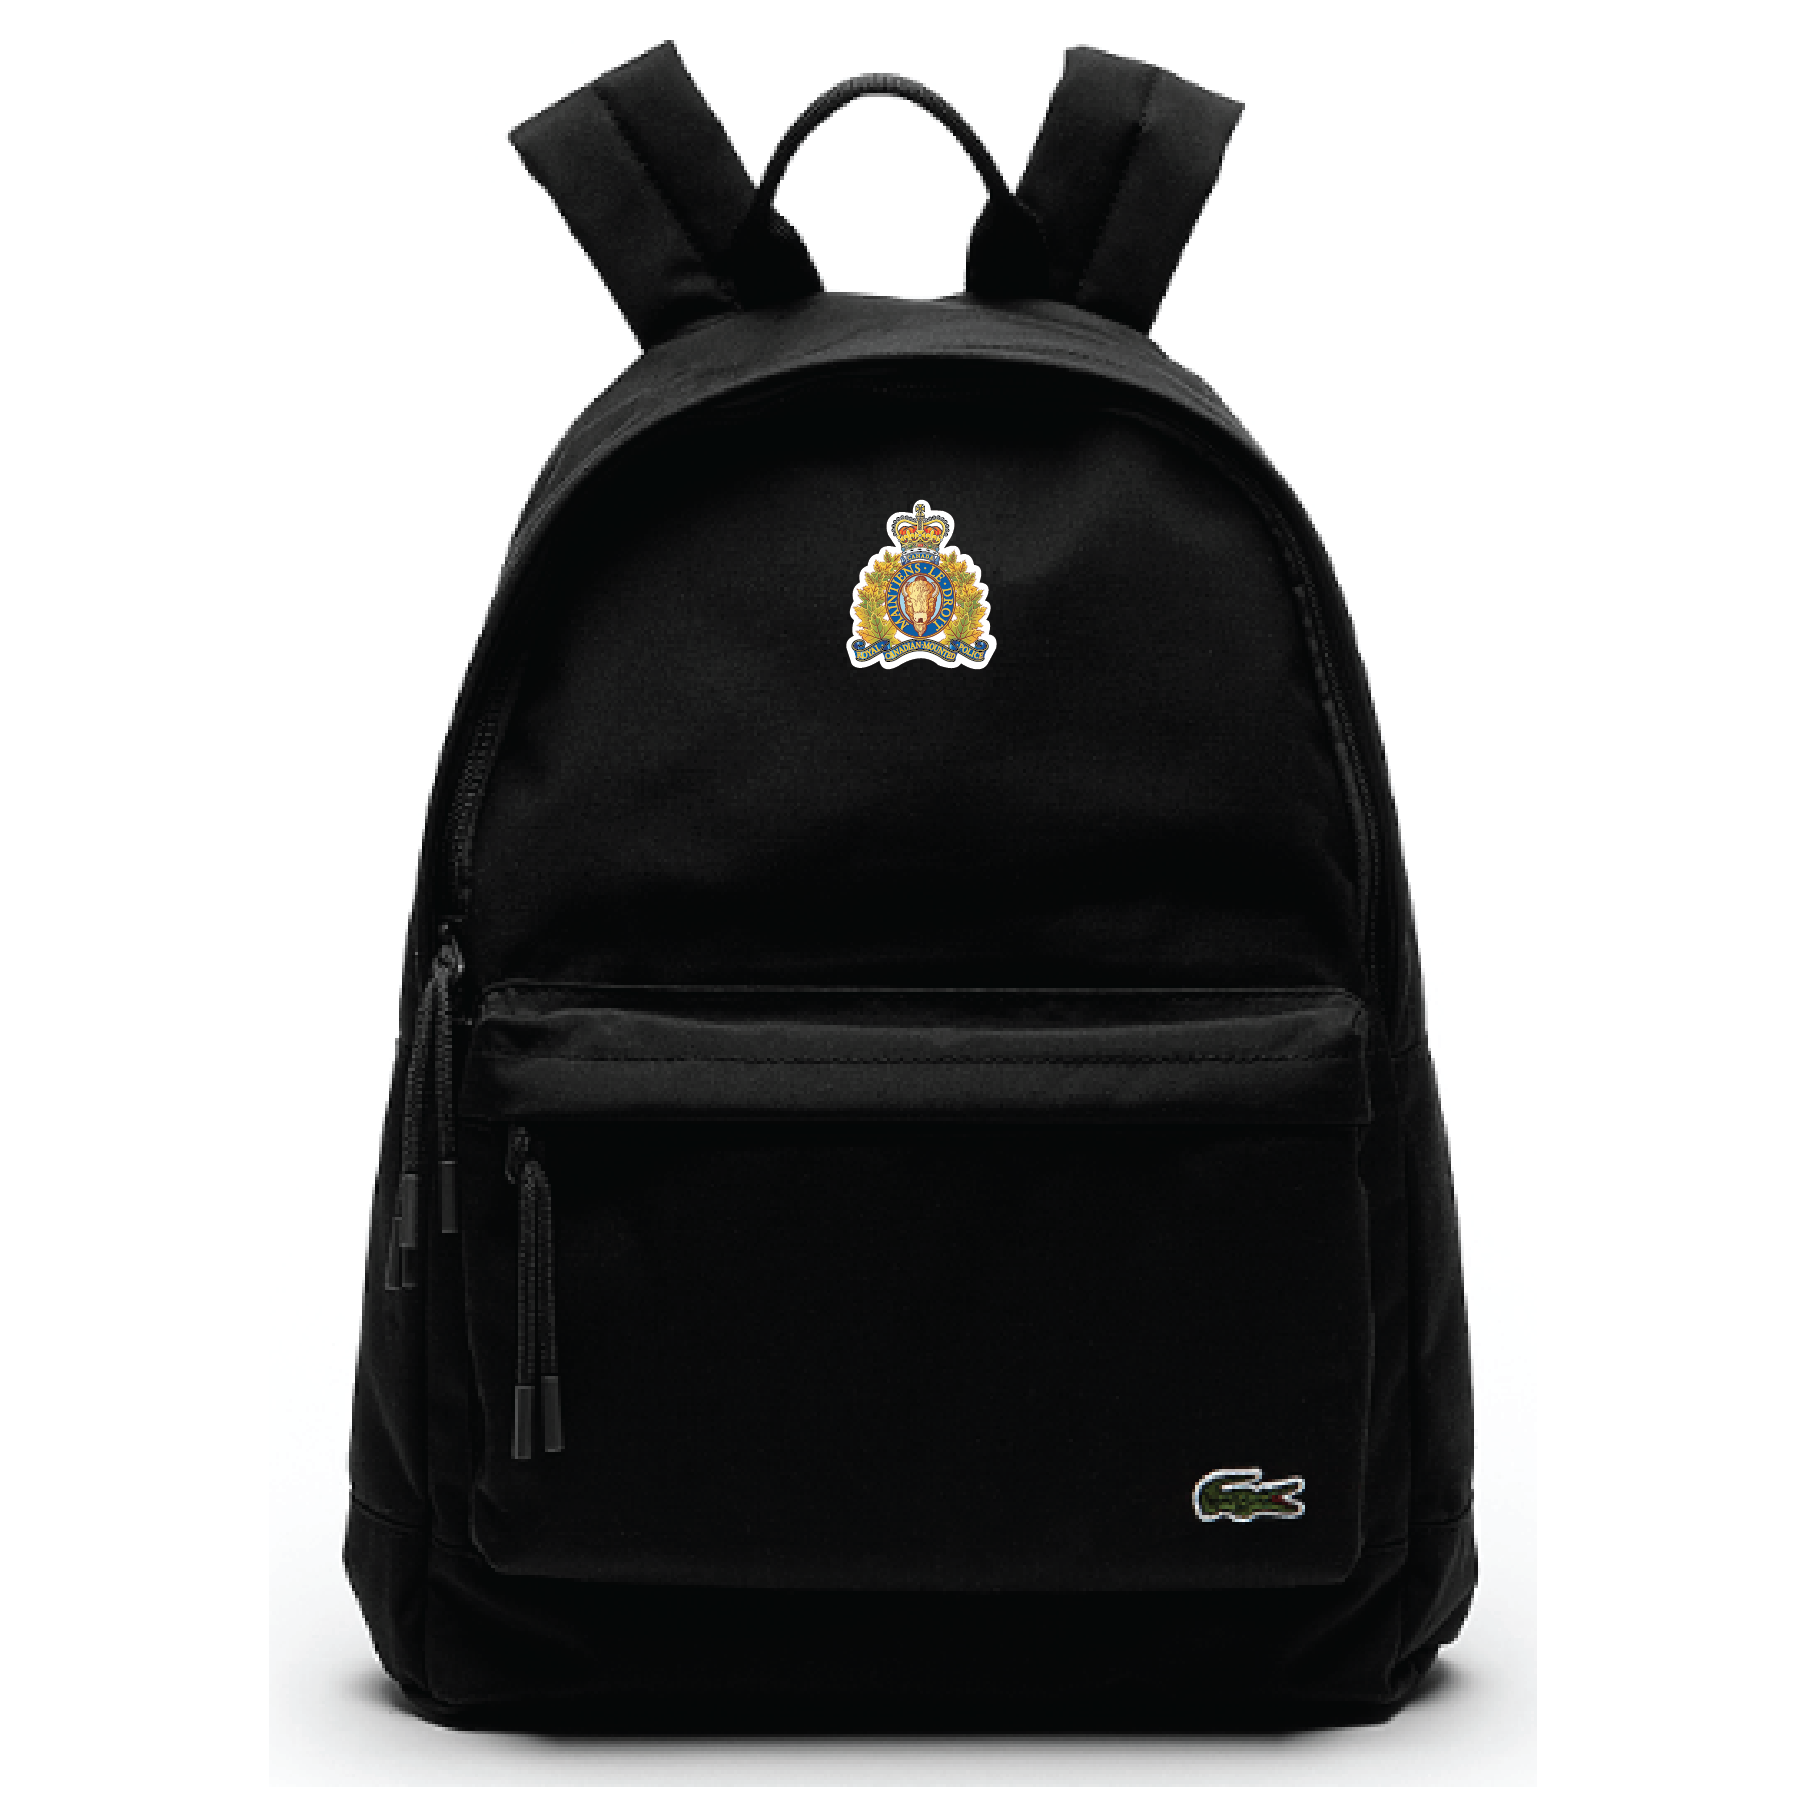 lacoste canvas backpack